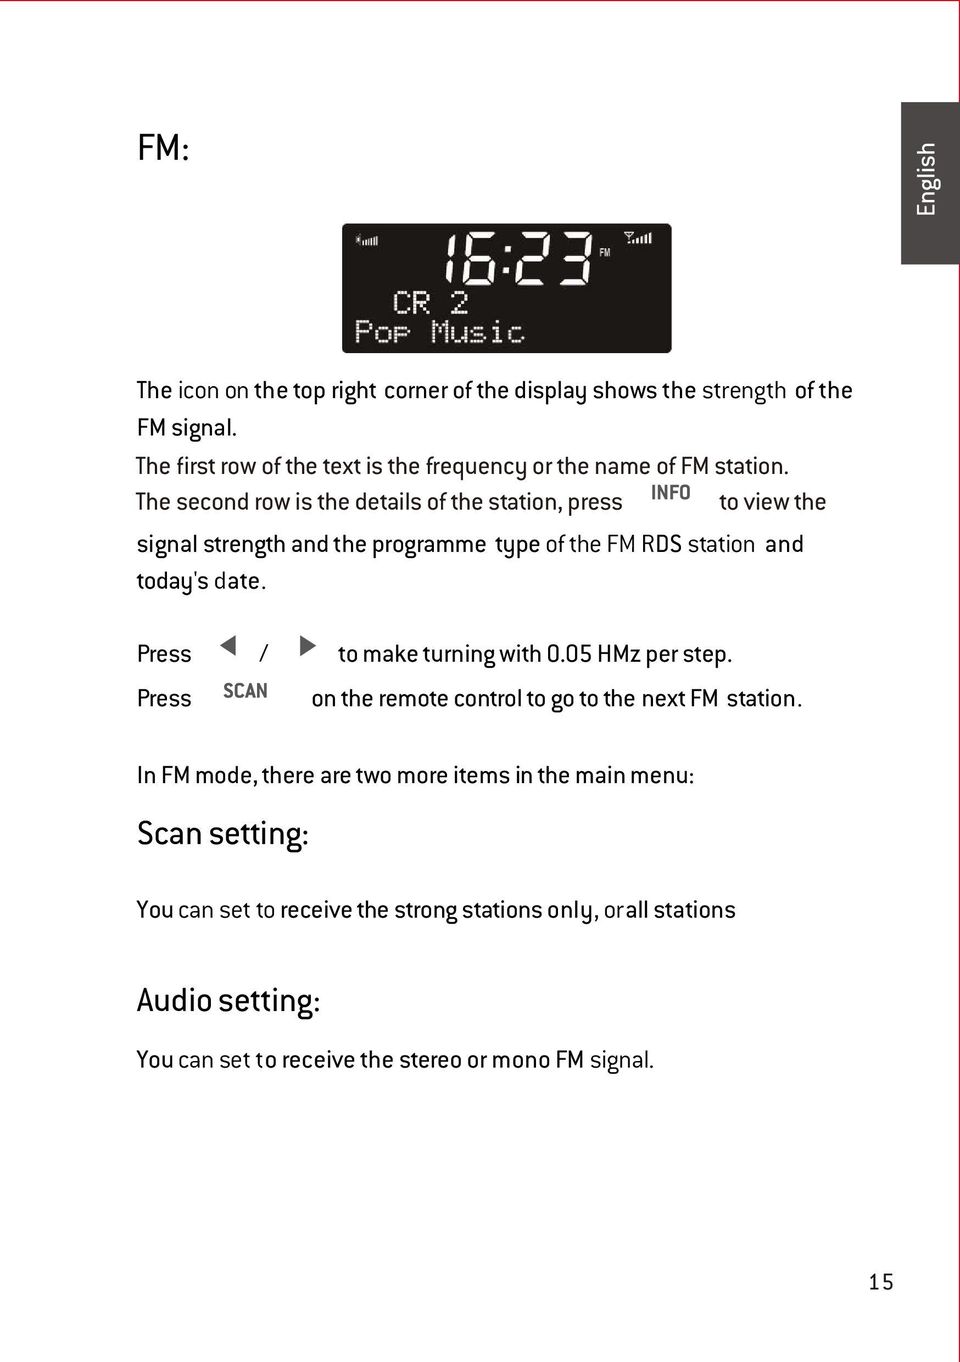 The second row is the details of the station, press to view the signal strength and the programme type of the FM RDS station and today's date.